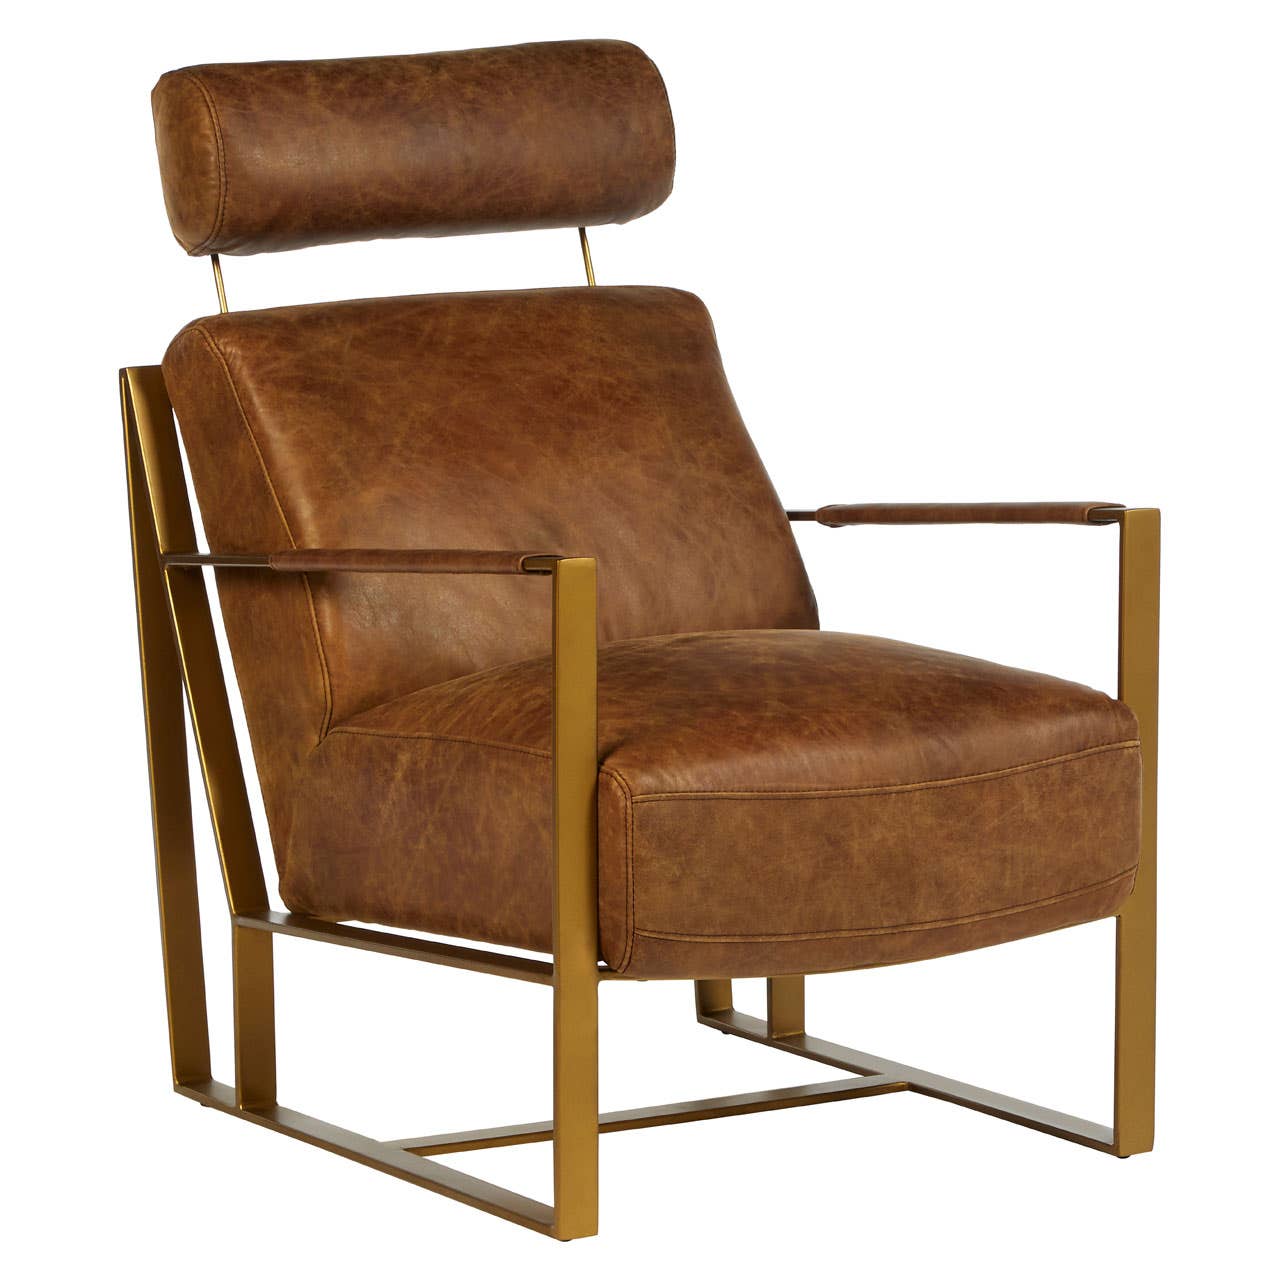 Hoxton Light Brown Leather Lounge Chair